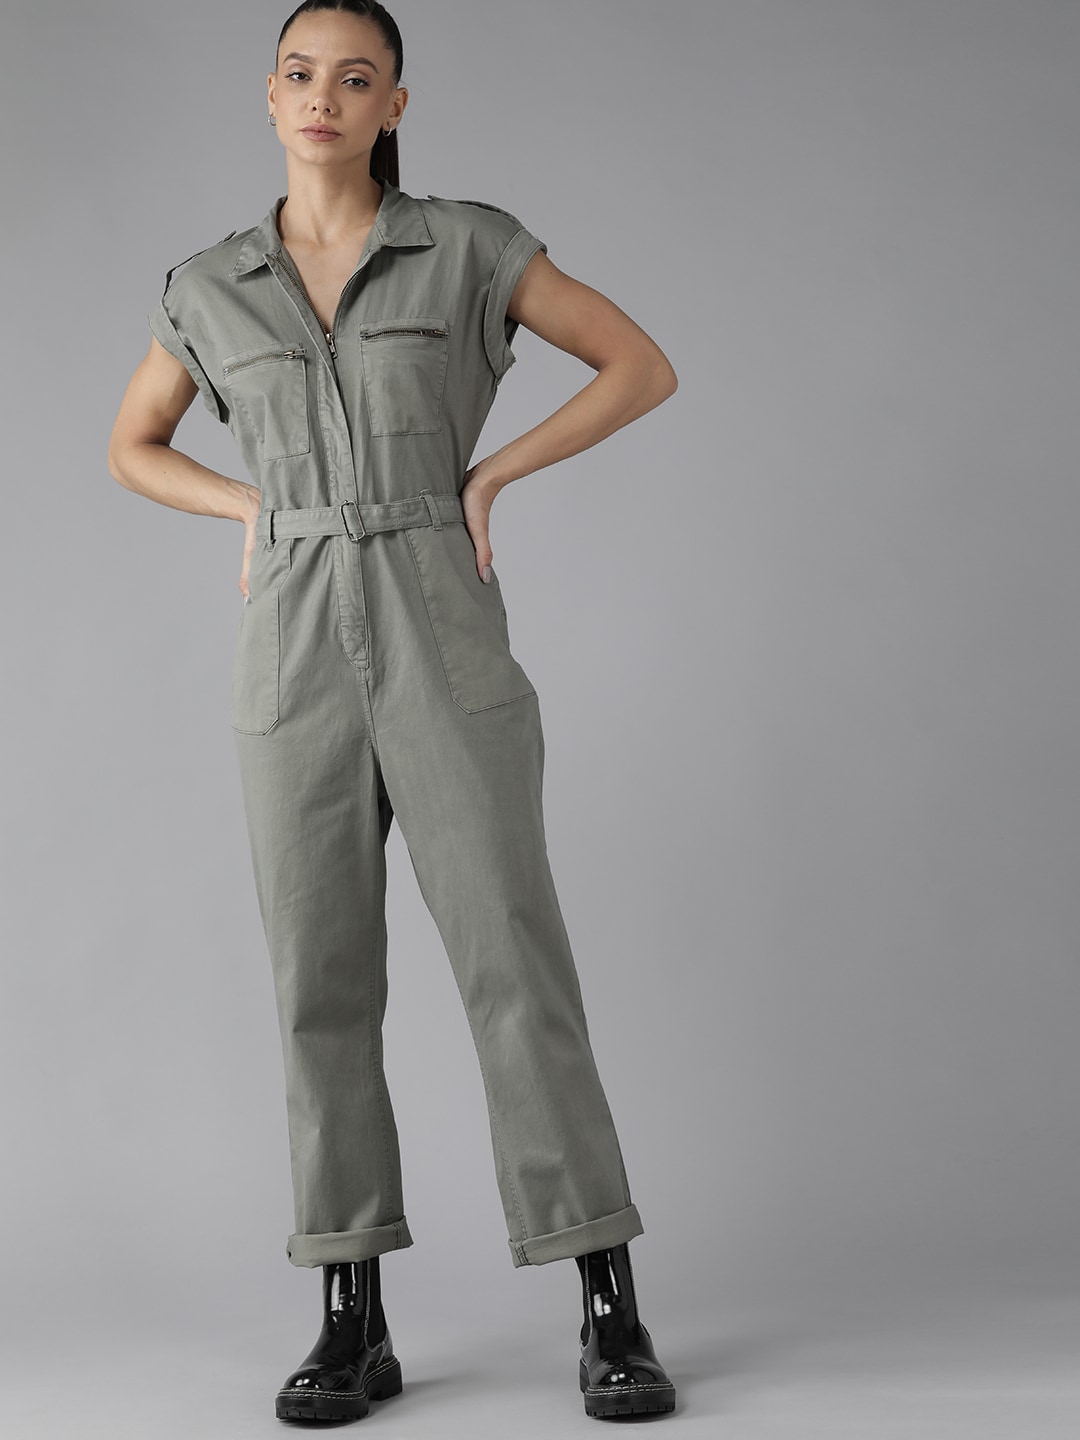 Roadster Sage Green Solid Boiler Jumpsuit With Fabric Belt Price in India